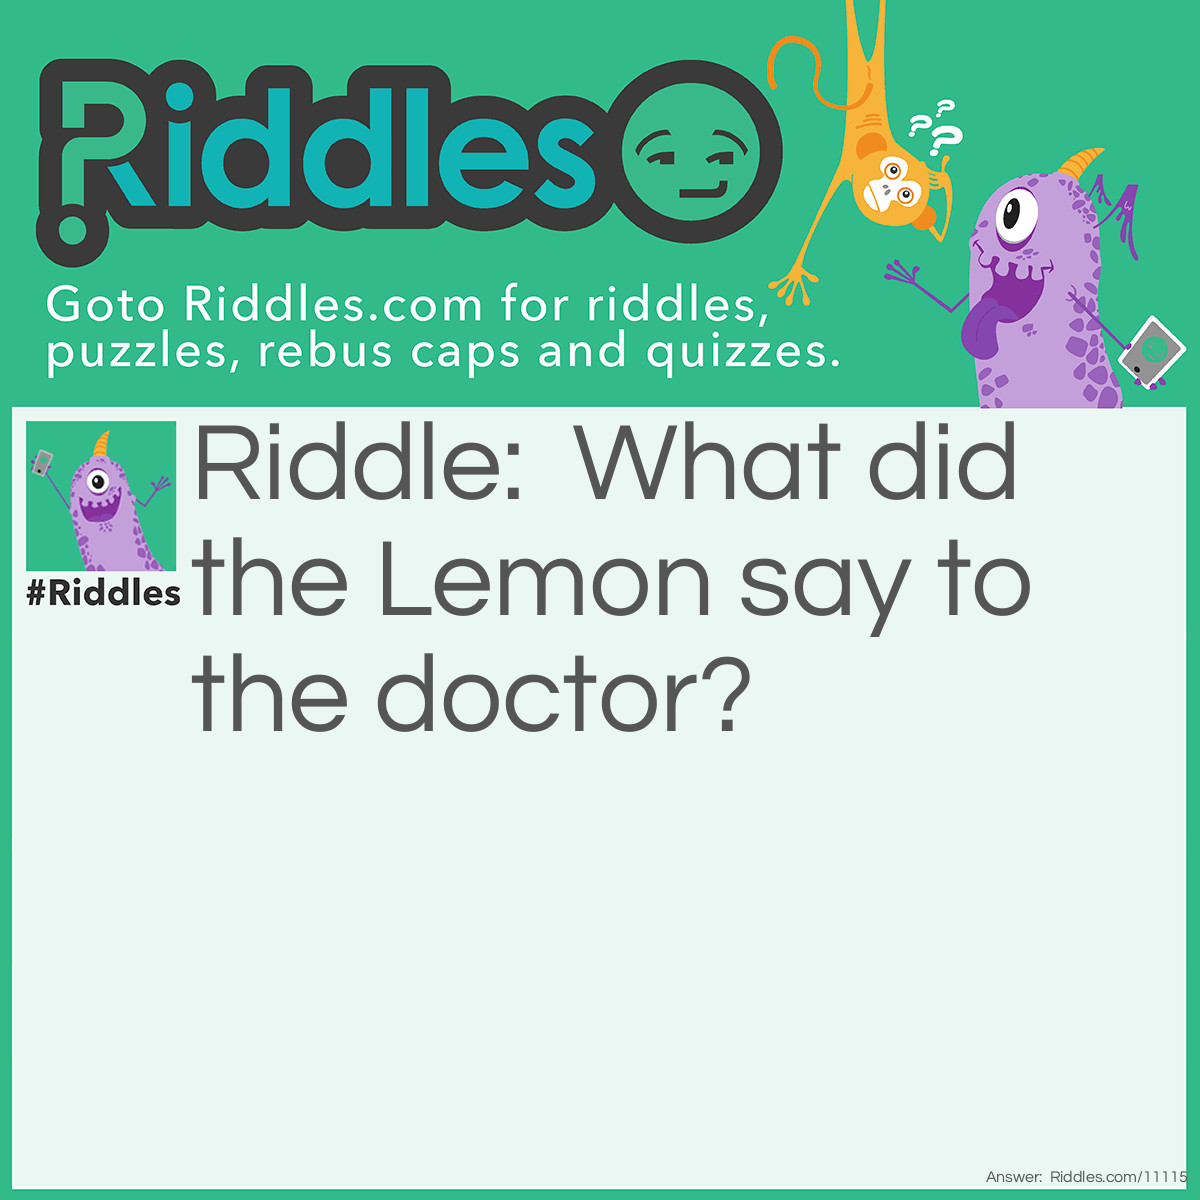 Riddle: What did the Lemon say to the doctor? Answer: I need lemon-aide.